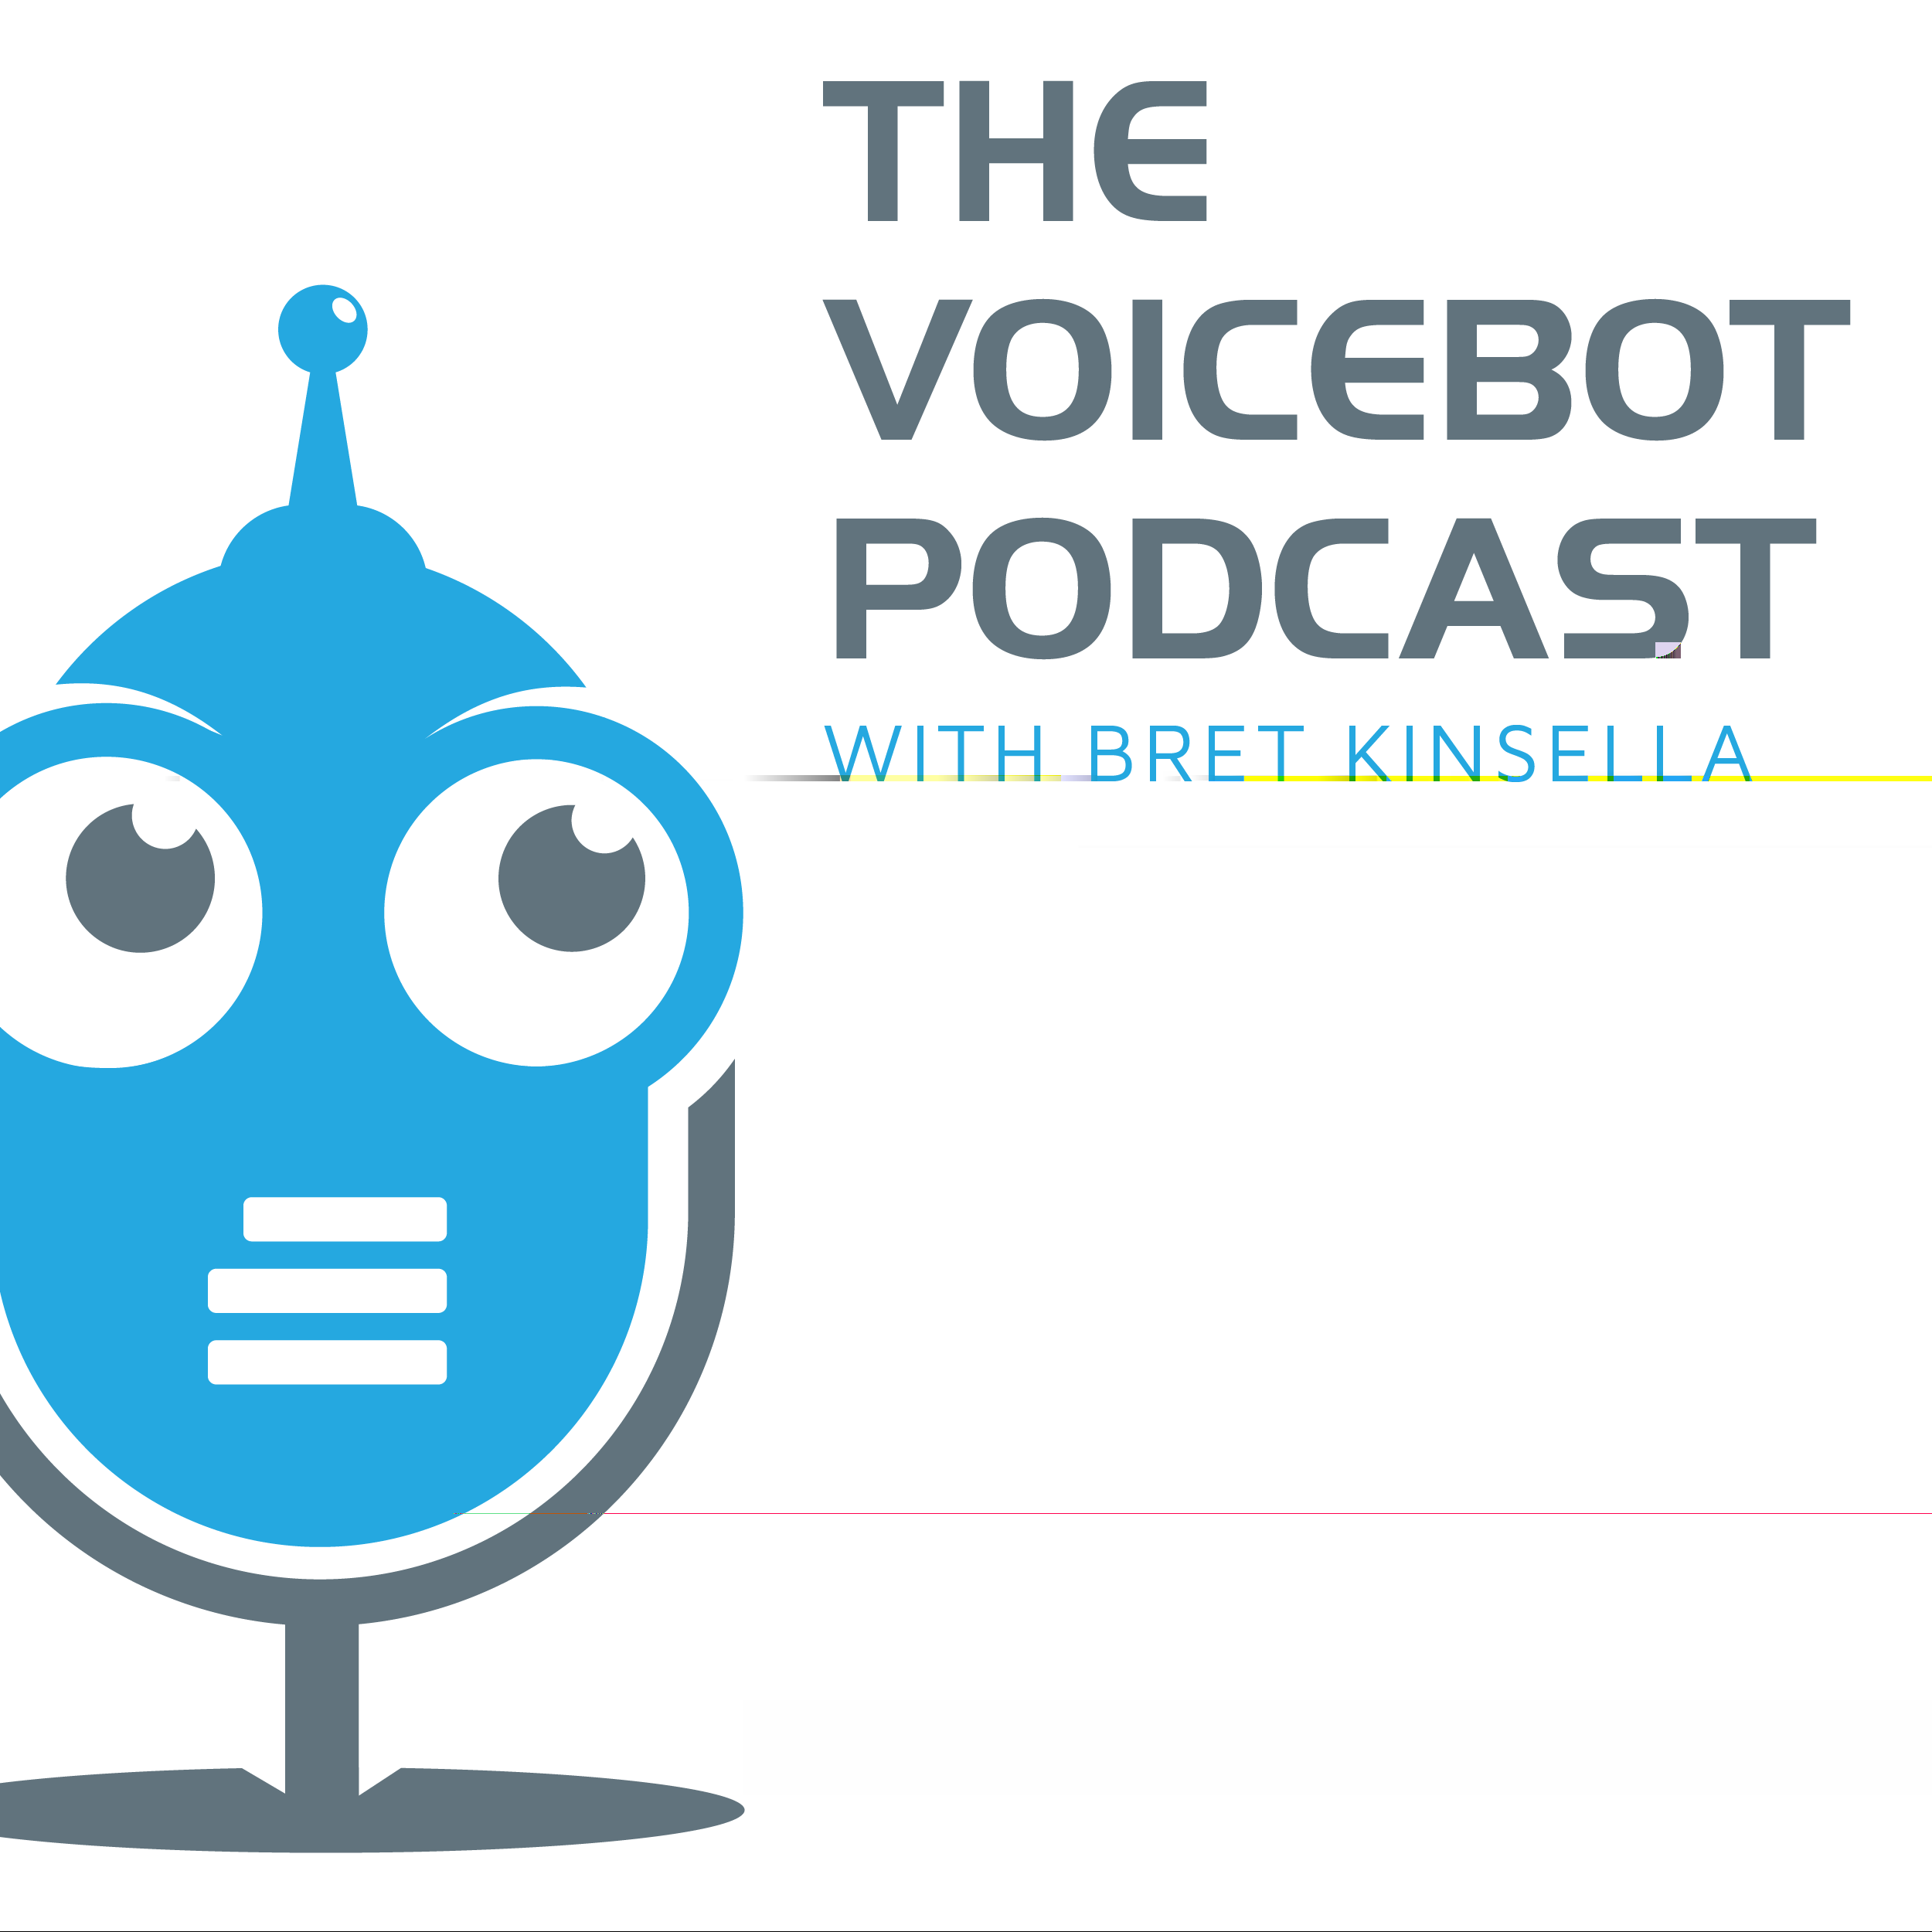 A highlight from Lee Mallon on Recreating Trip Advisor with ChatGPT and DALL-E for $53 and Other Adventures - Voicebot Podcast Ep 319